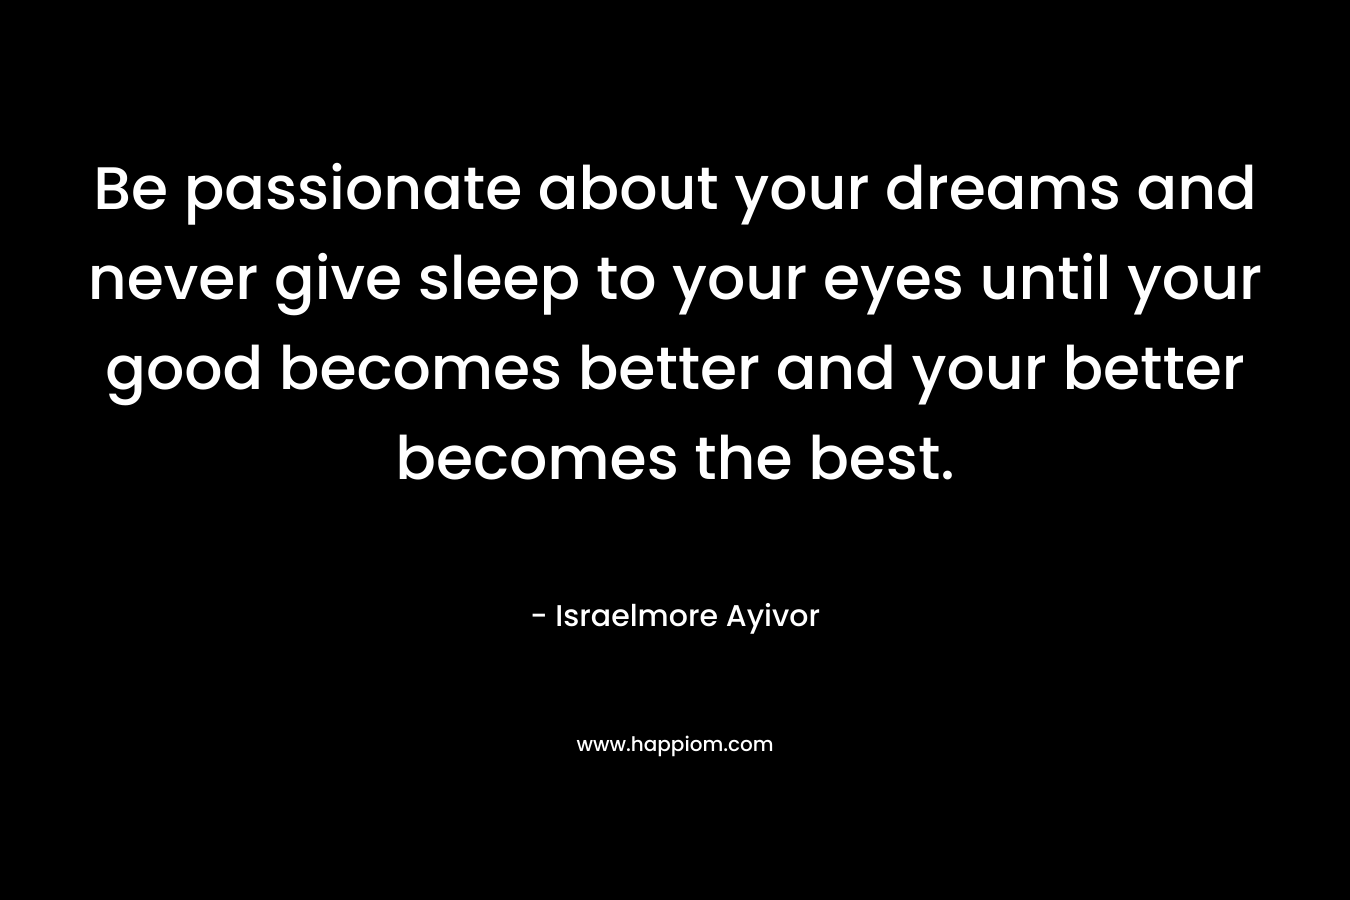 Be passionate about your dreams and never give sleep to your eyes until your good becomes better and your better becomes the best.